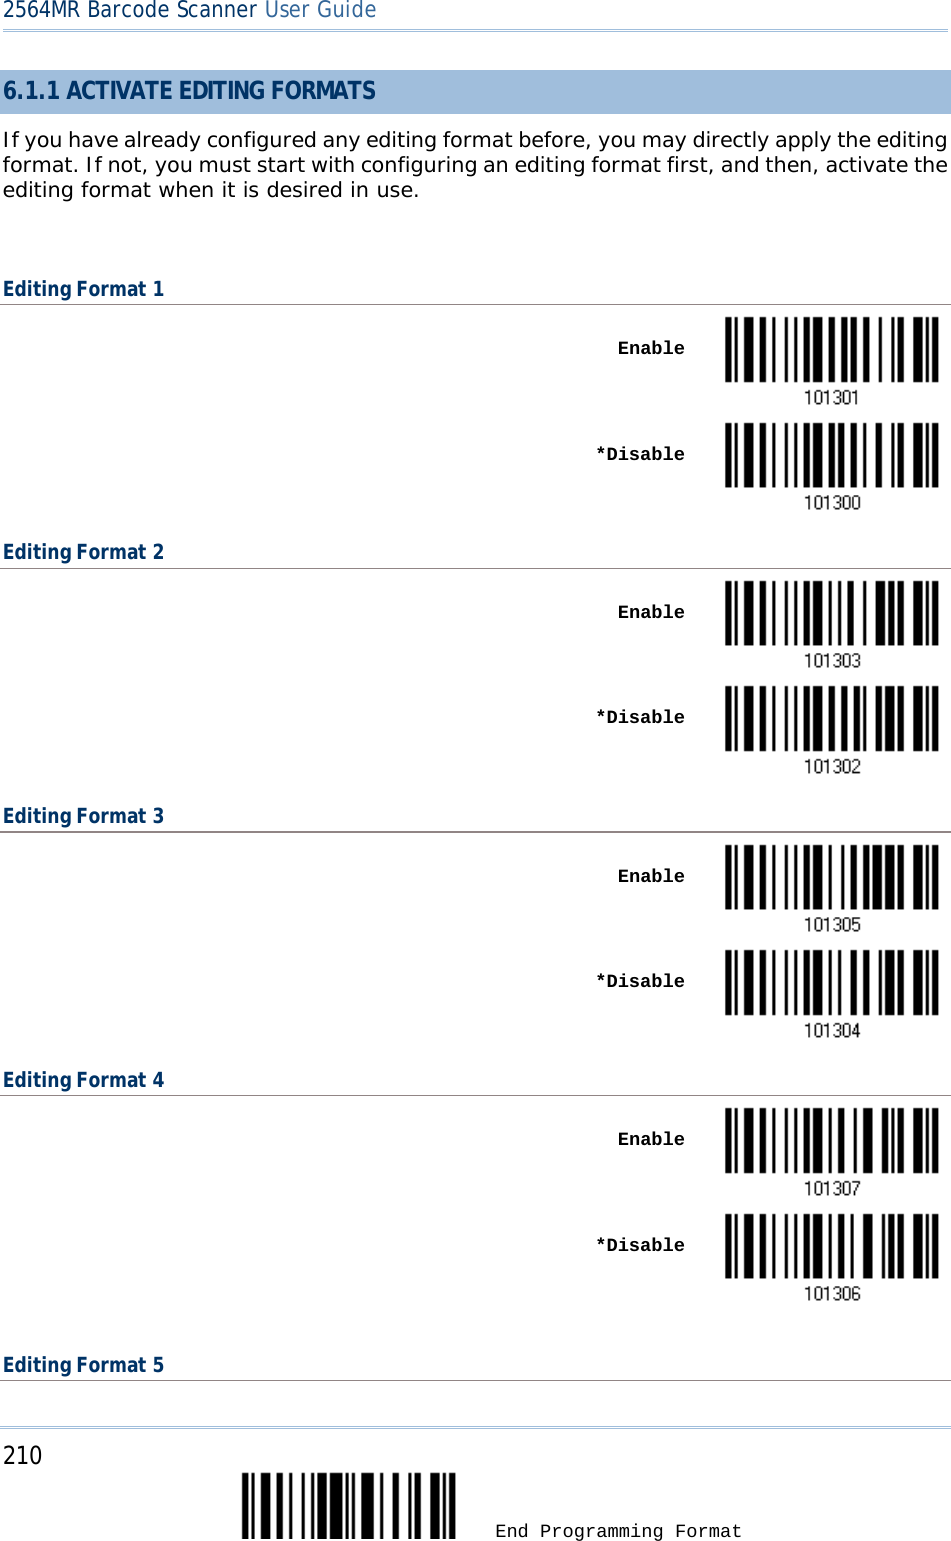 2564MR Barcode Scanner User Guide  6.1.1 ACTIVATE EDITING FORMATS If you have already configured any editing format before, you may directly apply the editing format. If not, you must start with configuring an editing format first, and then, activate the editing format when it is desired in use.  Editing Format 1    Enable     *Disable  Editing Format 2    Enable     *Disable  Editing Format 3    Enable     *Disable  Editing Format 4    Enable     *Disable   Editing Format 5 210  End Programming Format 